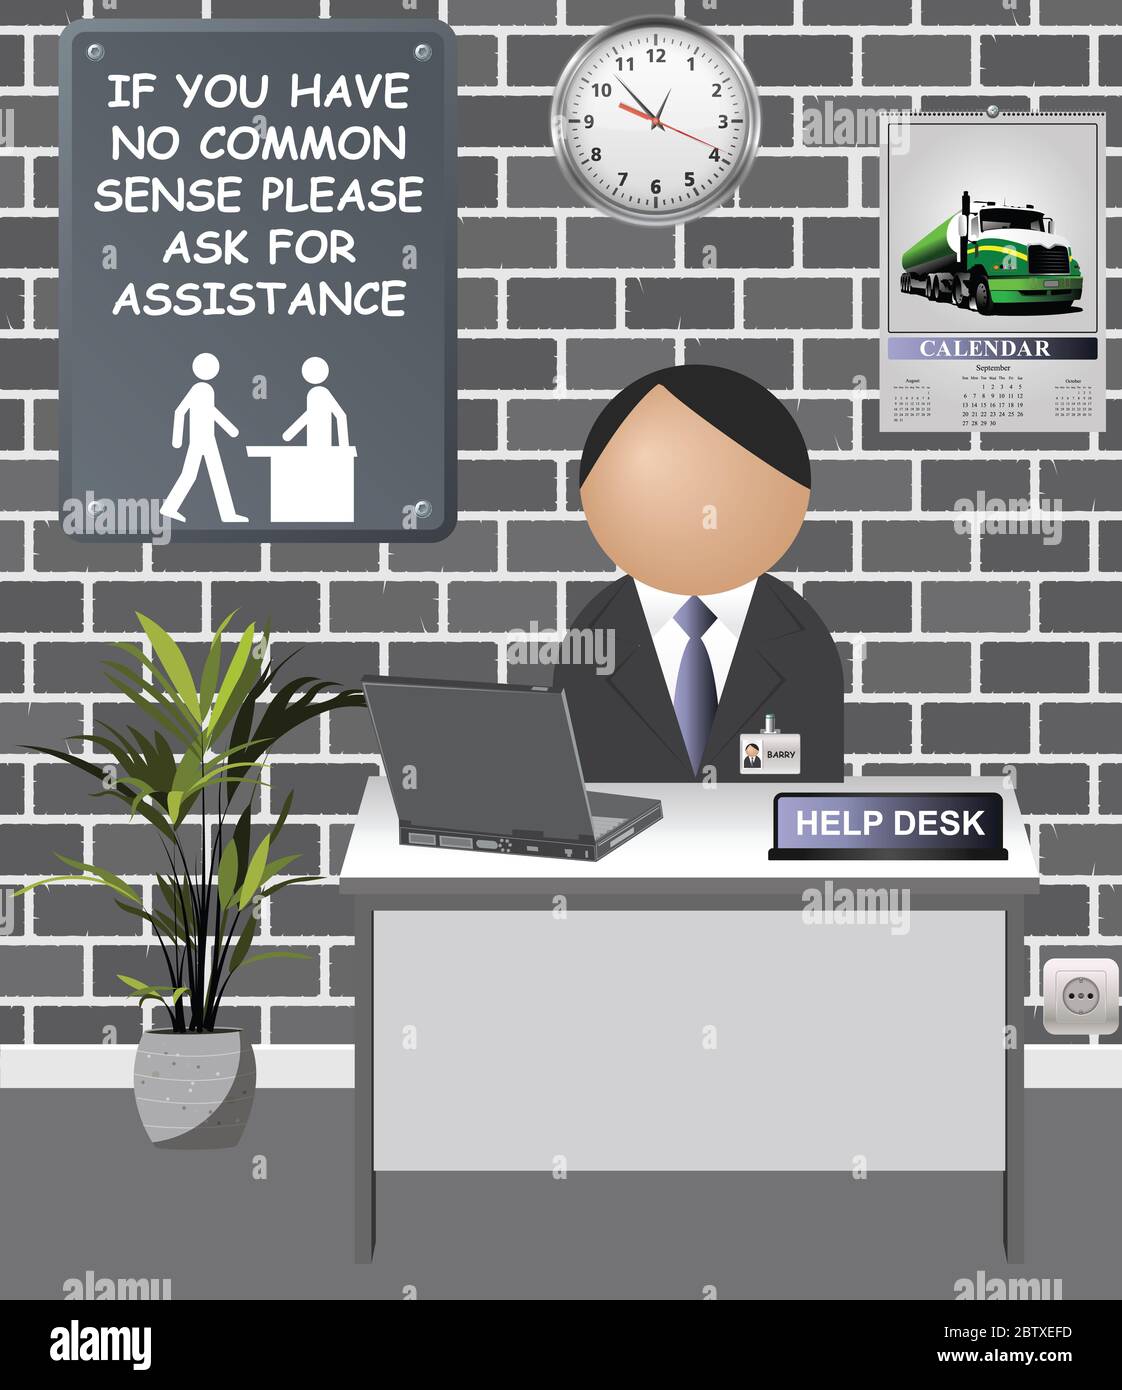 Comical male assistant at help desk for stupid people with no common sense Stock Photo